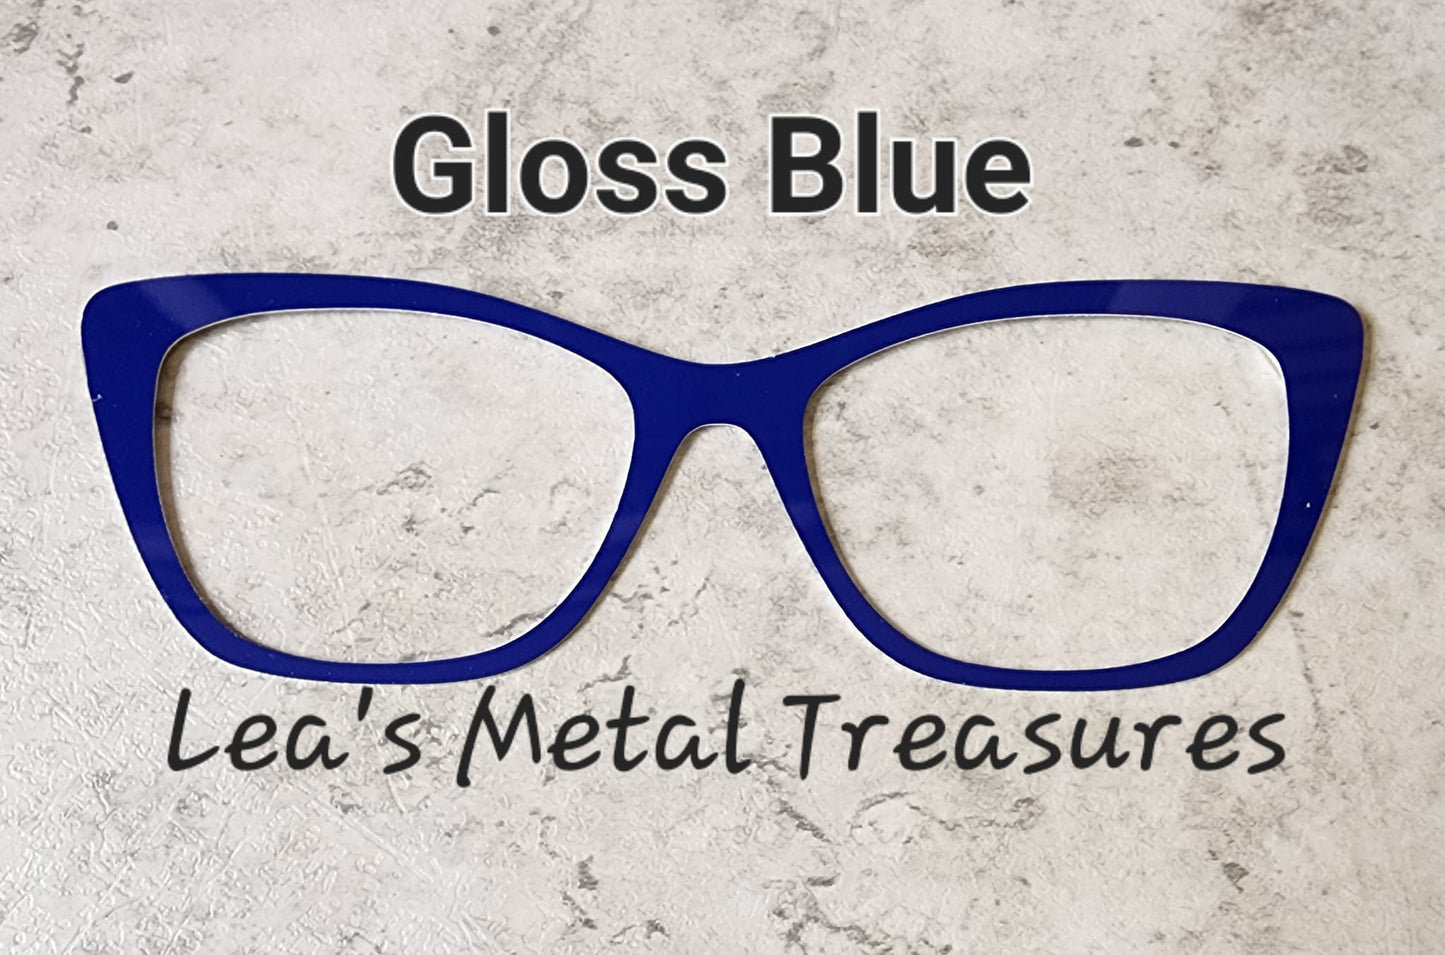 Gloss Blue Naked Collection - Eyeglasses Cover - Comes with Magnets